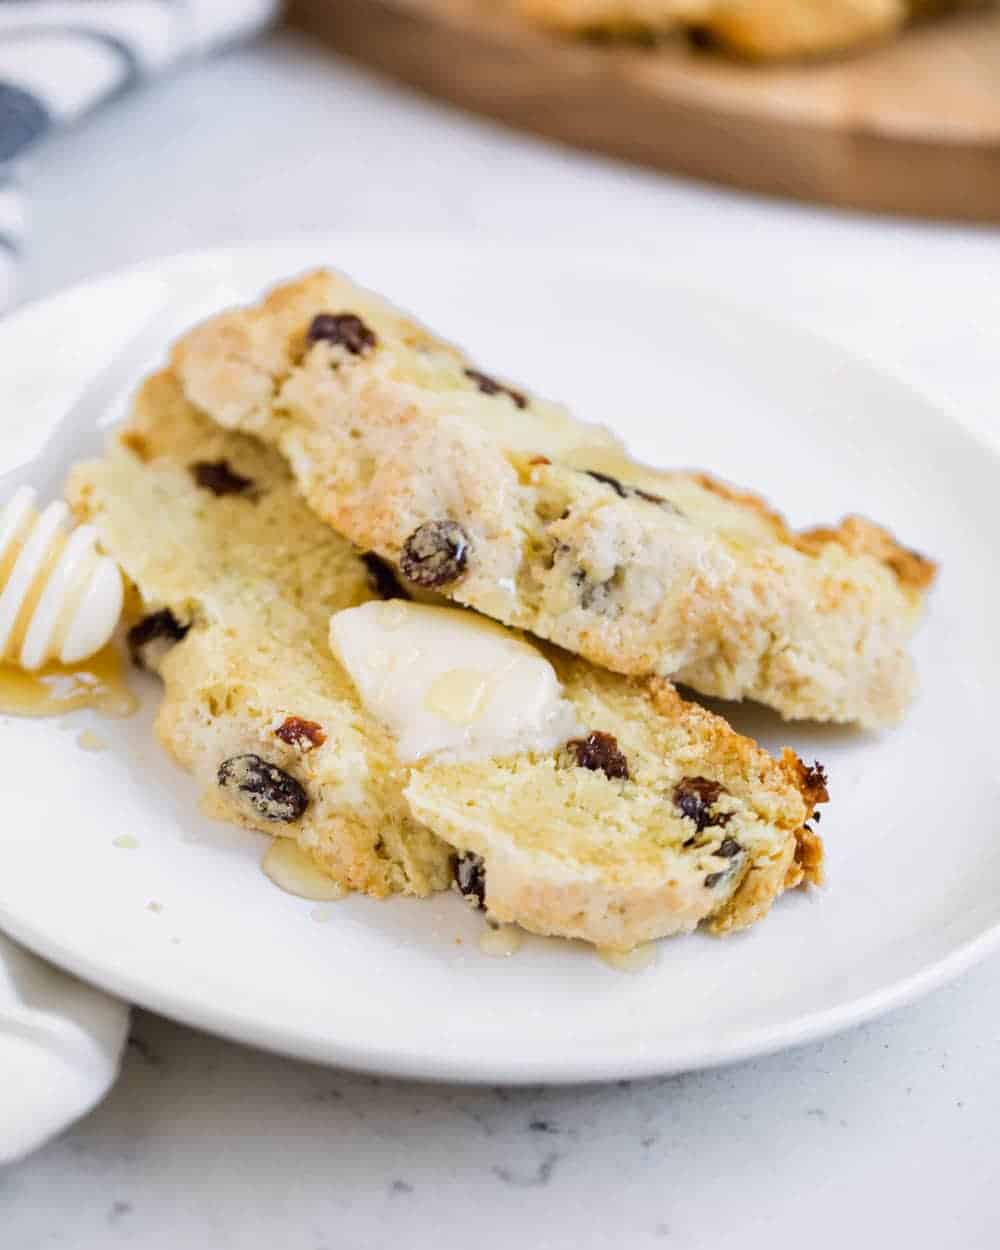 Irish soda bread with raisins that's topped with butter and honey.